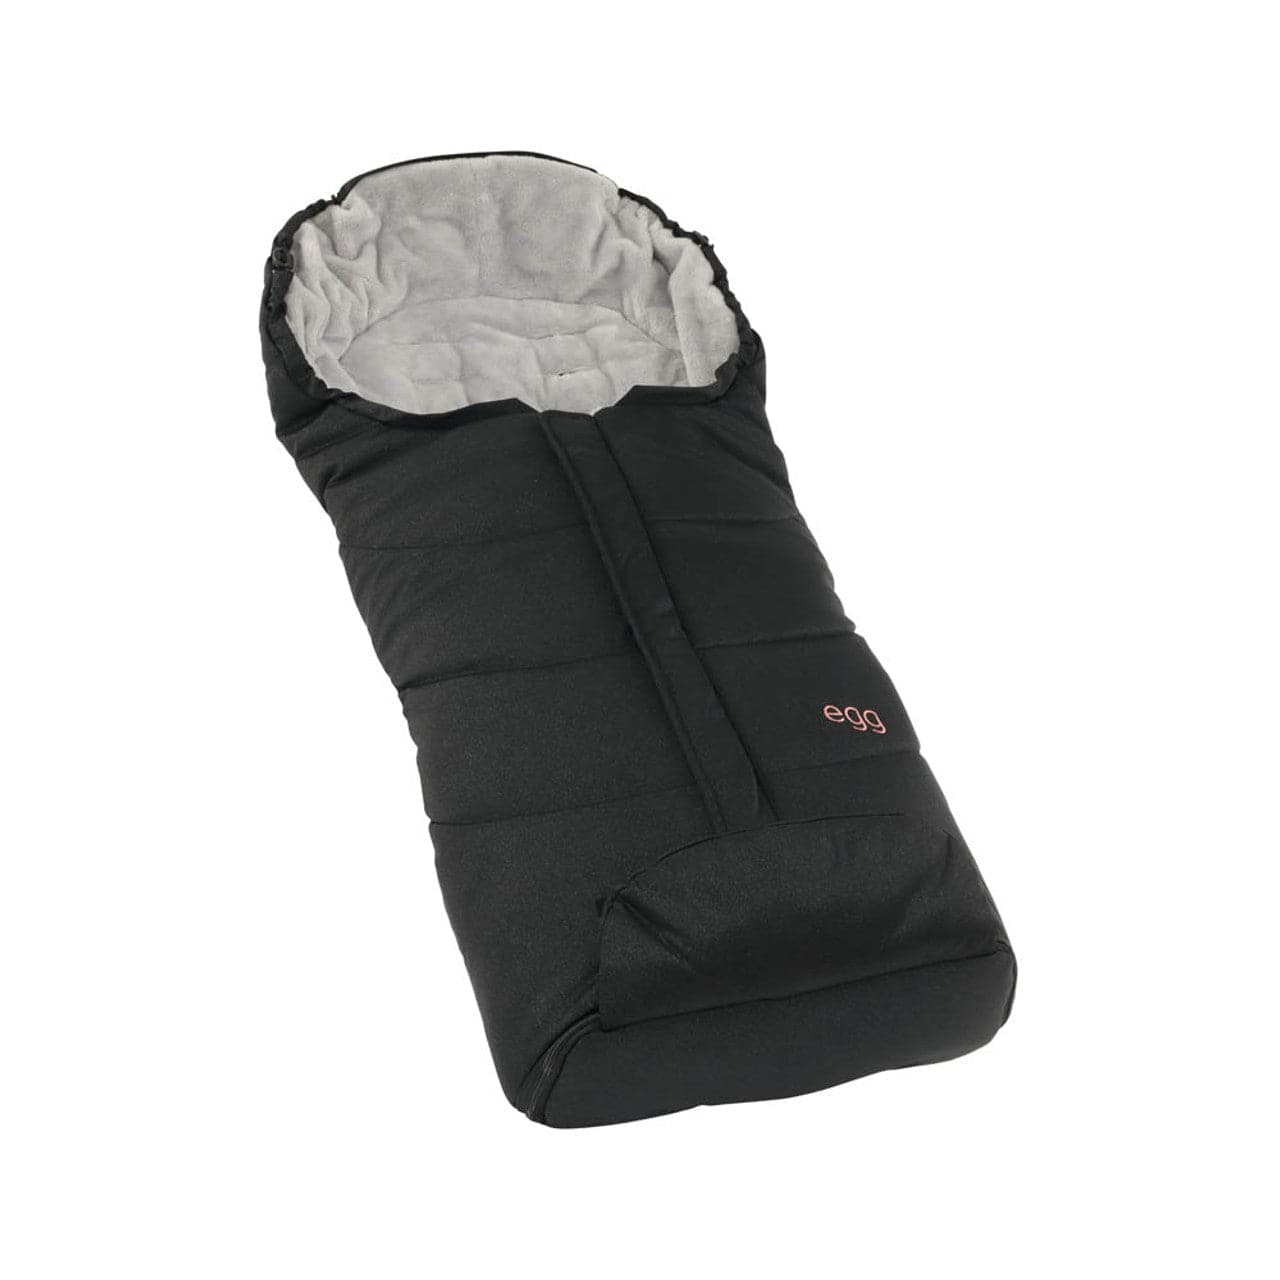 Egg® 2 Special Edition Footmuff - Diamond Black -  | For Your Little One